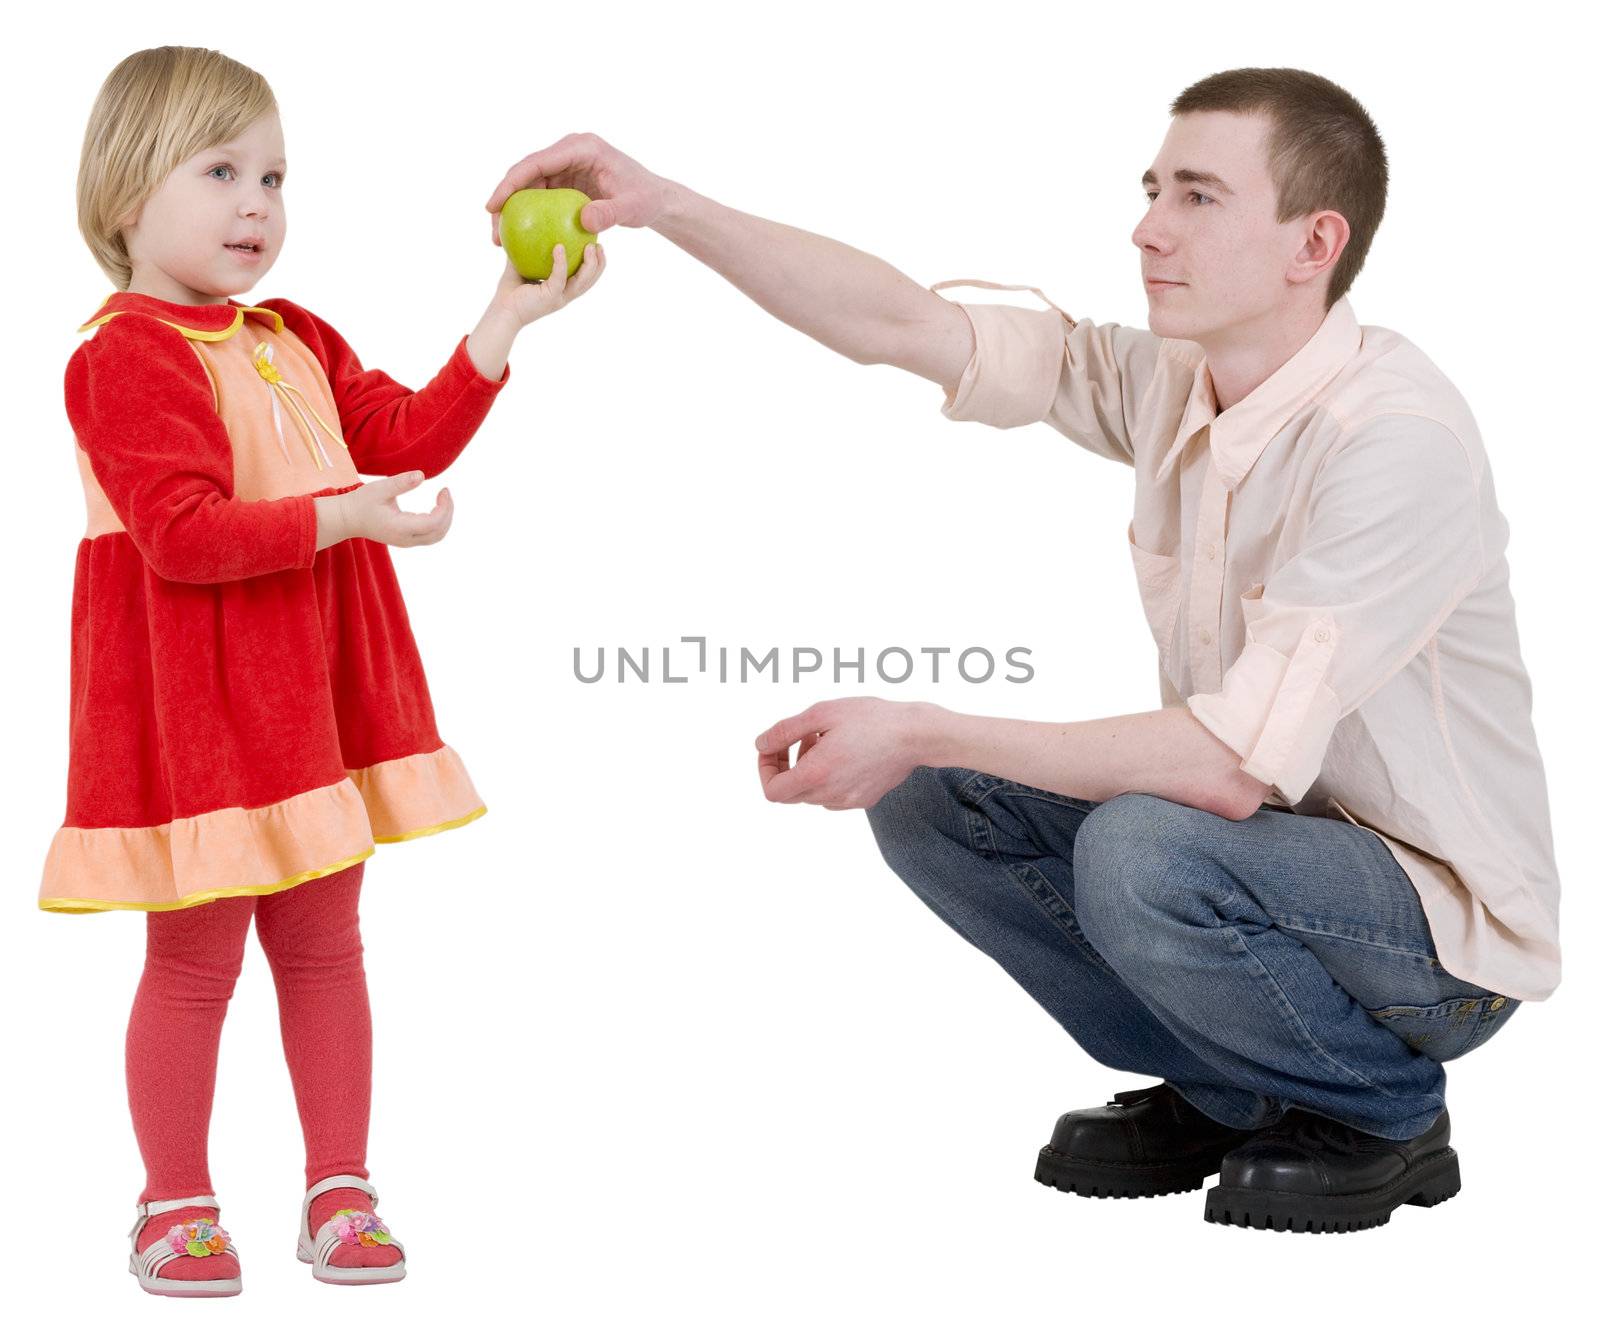 Man give green apple to the girl on white 